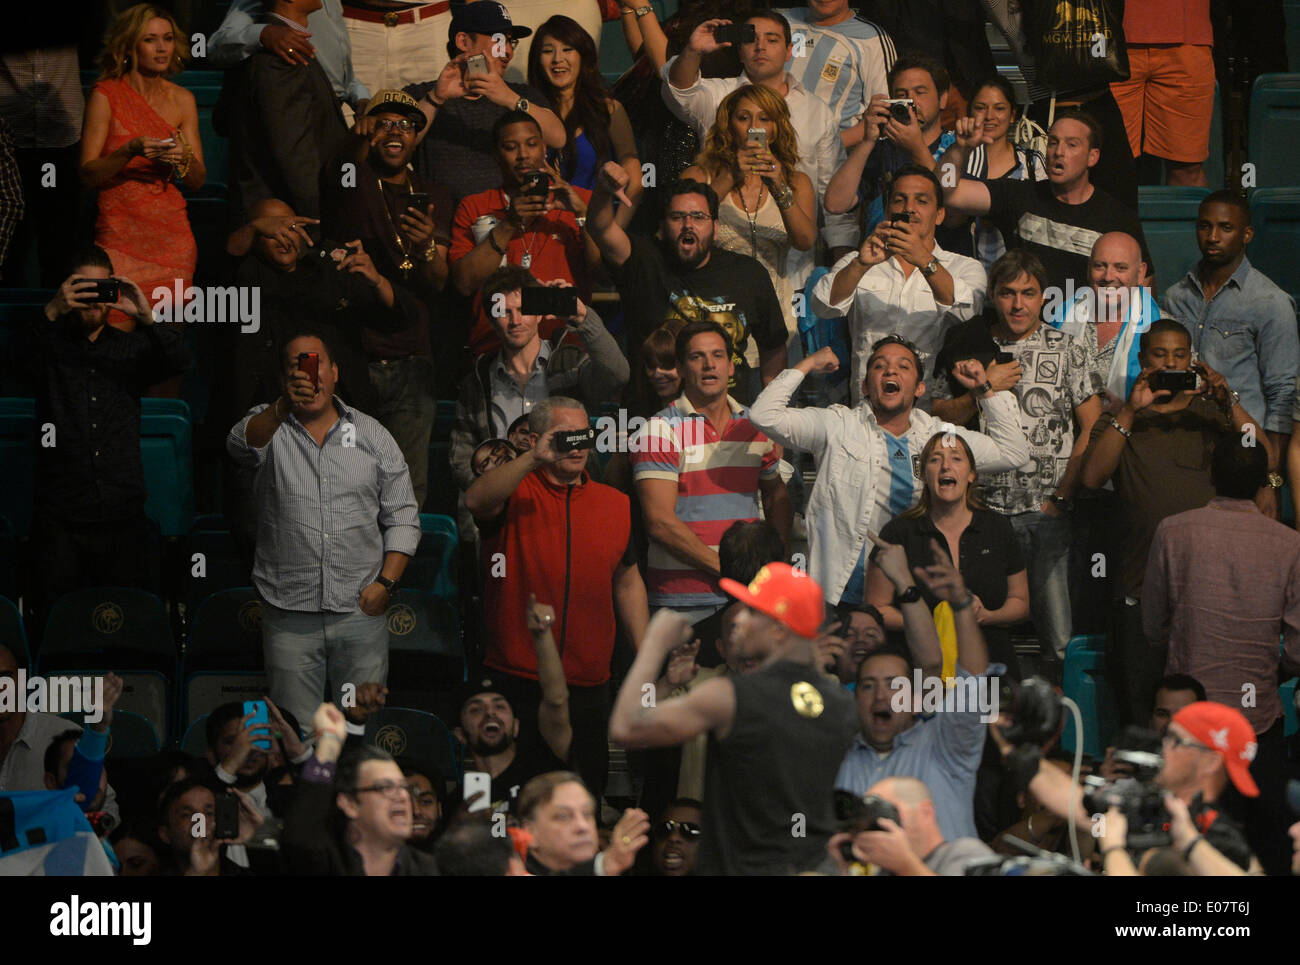 May 3, 2014. Las Vegas Nevada-USA.Fans yell jesters at Floyd Mayweather Jr. after he went 12 rounds with Marco Maidana Saturday night at the MGM grand hotel. Floyd Mayweather Jr. took the win by a majority decision over Marco Maidana for the WBC-WBA & Ring magazine welterweight title in Las Vegas. Photo by Gene Blevins/LA DailyNews/ZumaPress (Credit Image: © Gene Blevins/ZUMAPRESS.com) Stock Photo